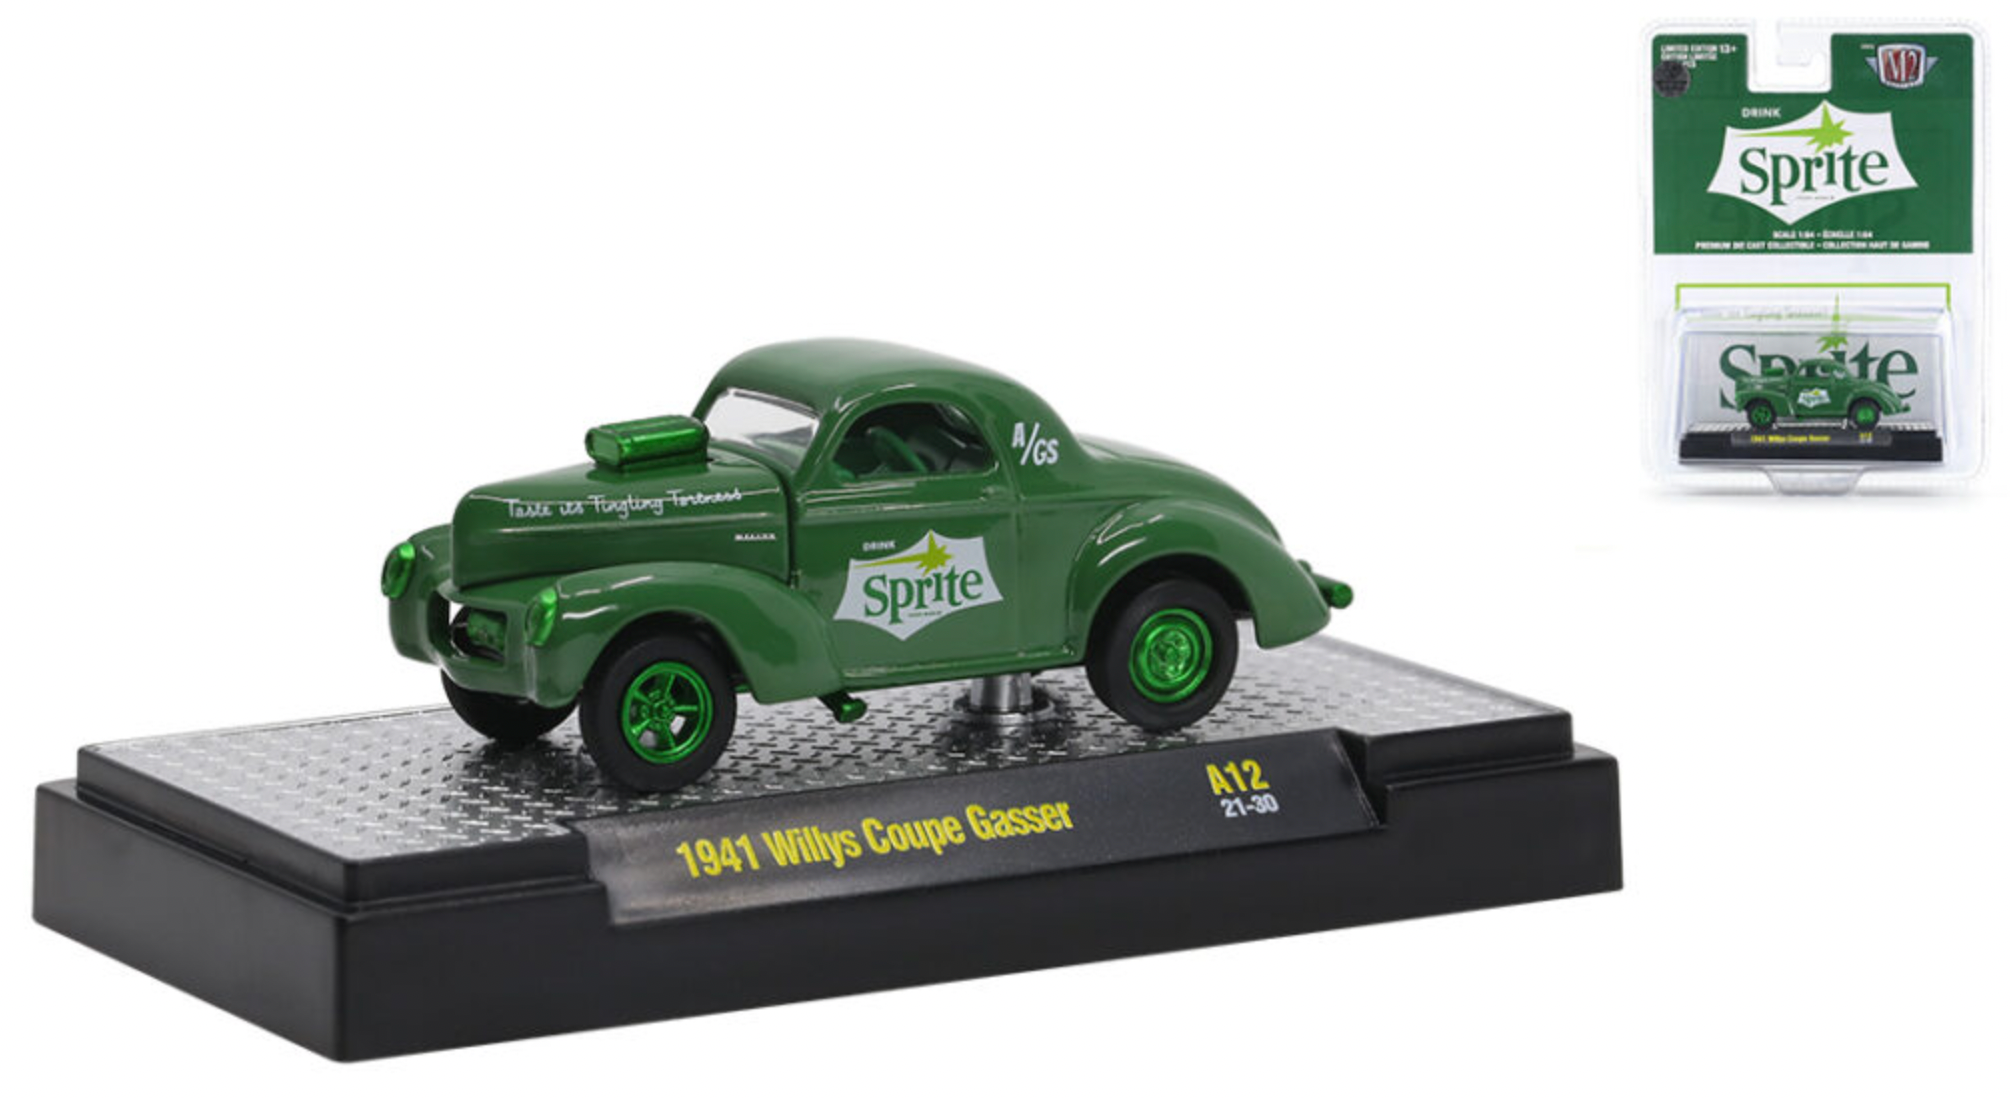 1/64 1941 WILLYS COUPE GASSER - SPRITE "CHASE" (GREEN RIMS VARIATION) 750PCS